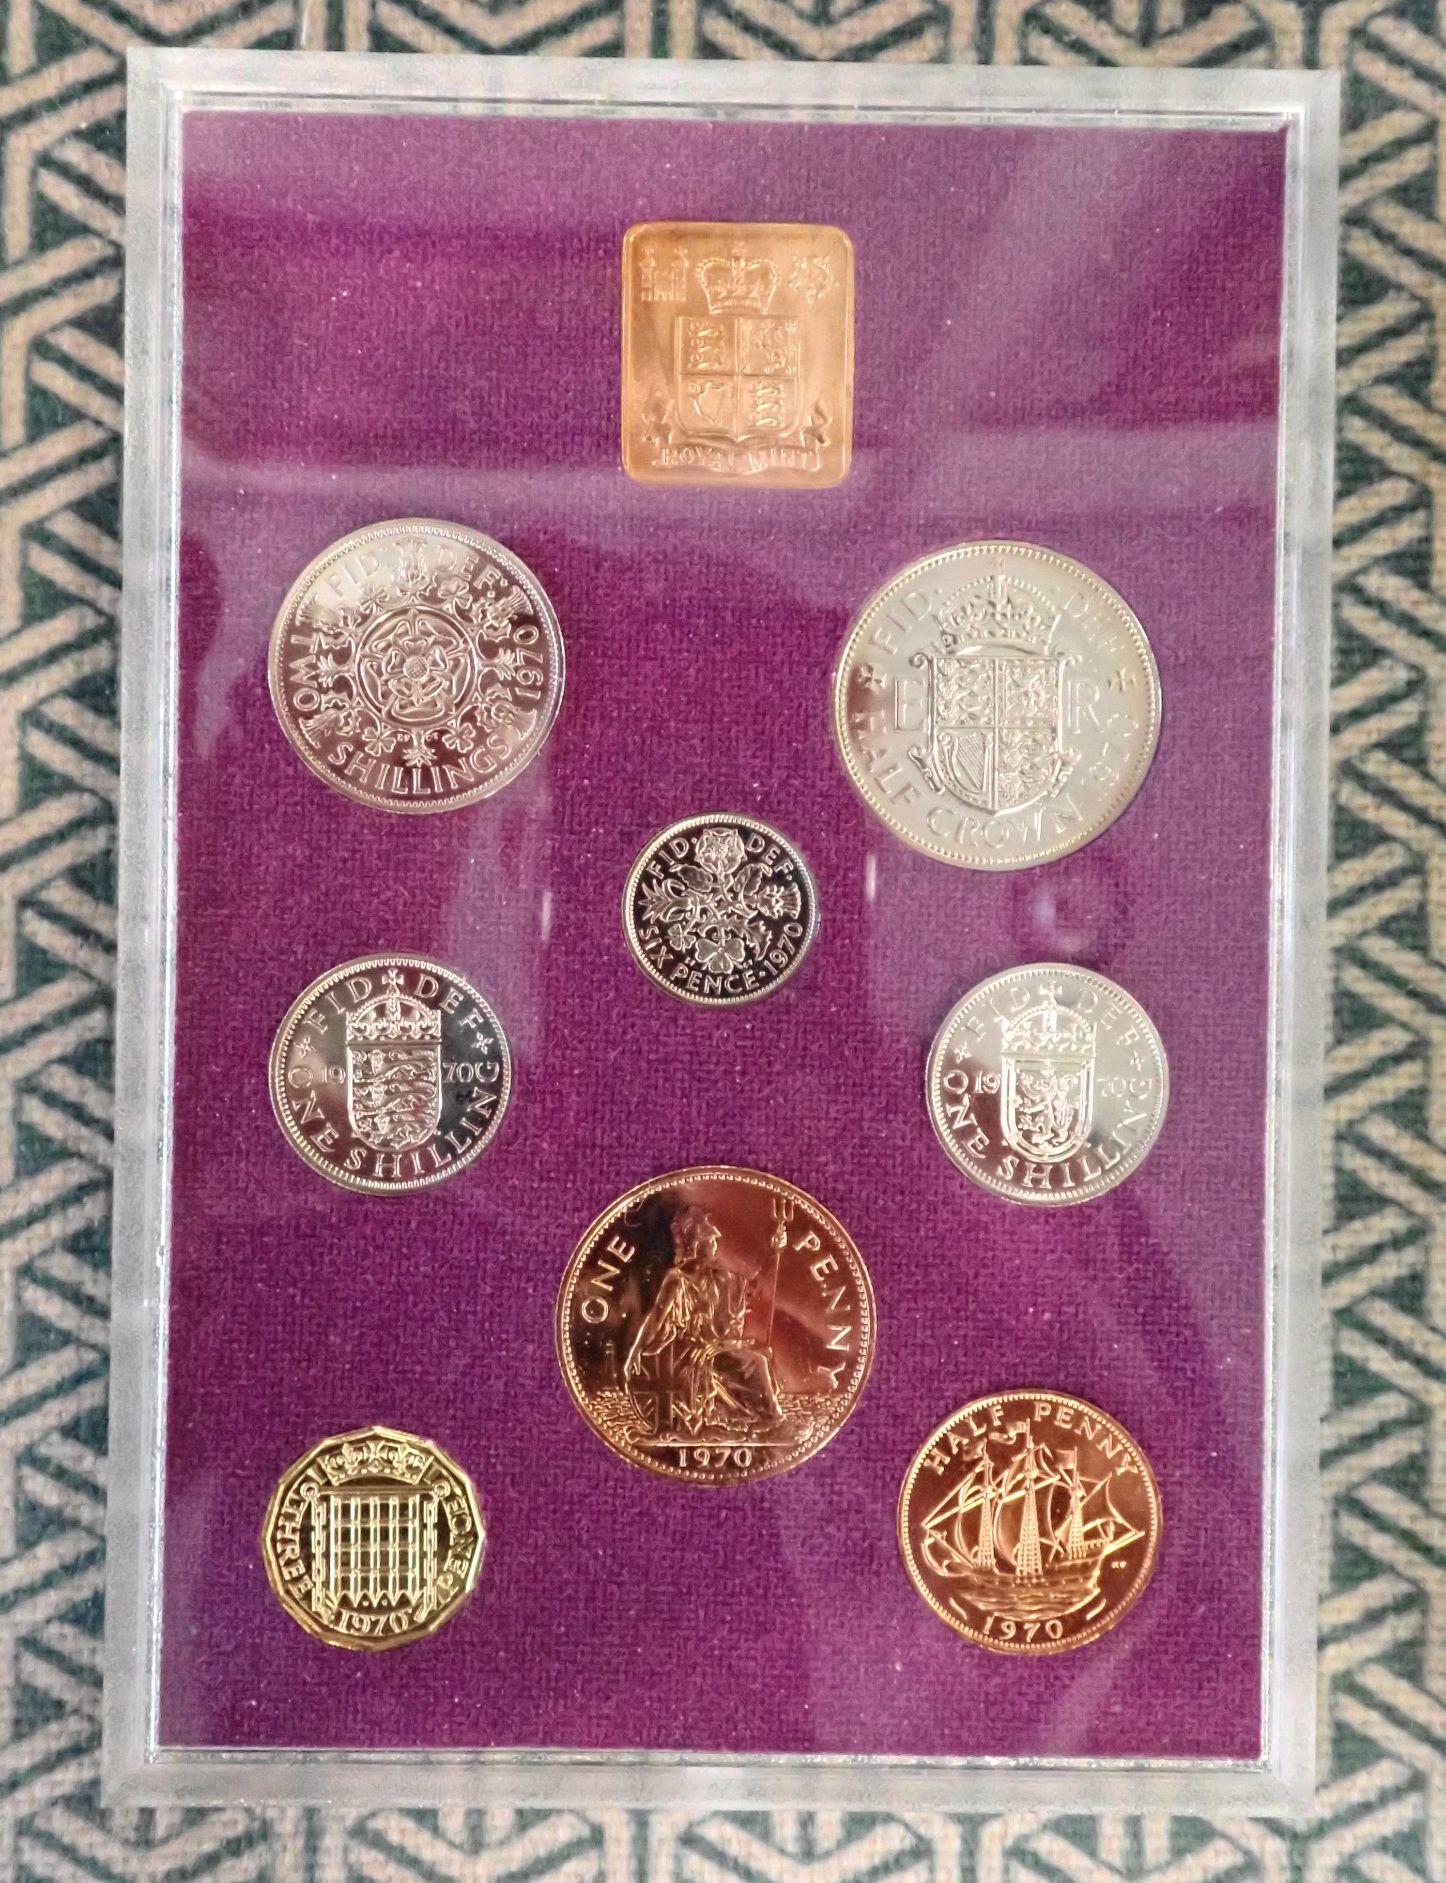 A 1970 GREAT BRITAIN PROOF SPECIMEN COIN SET - Image 2 of 3